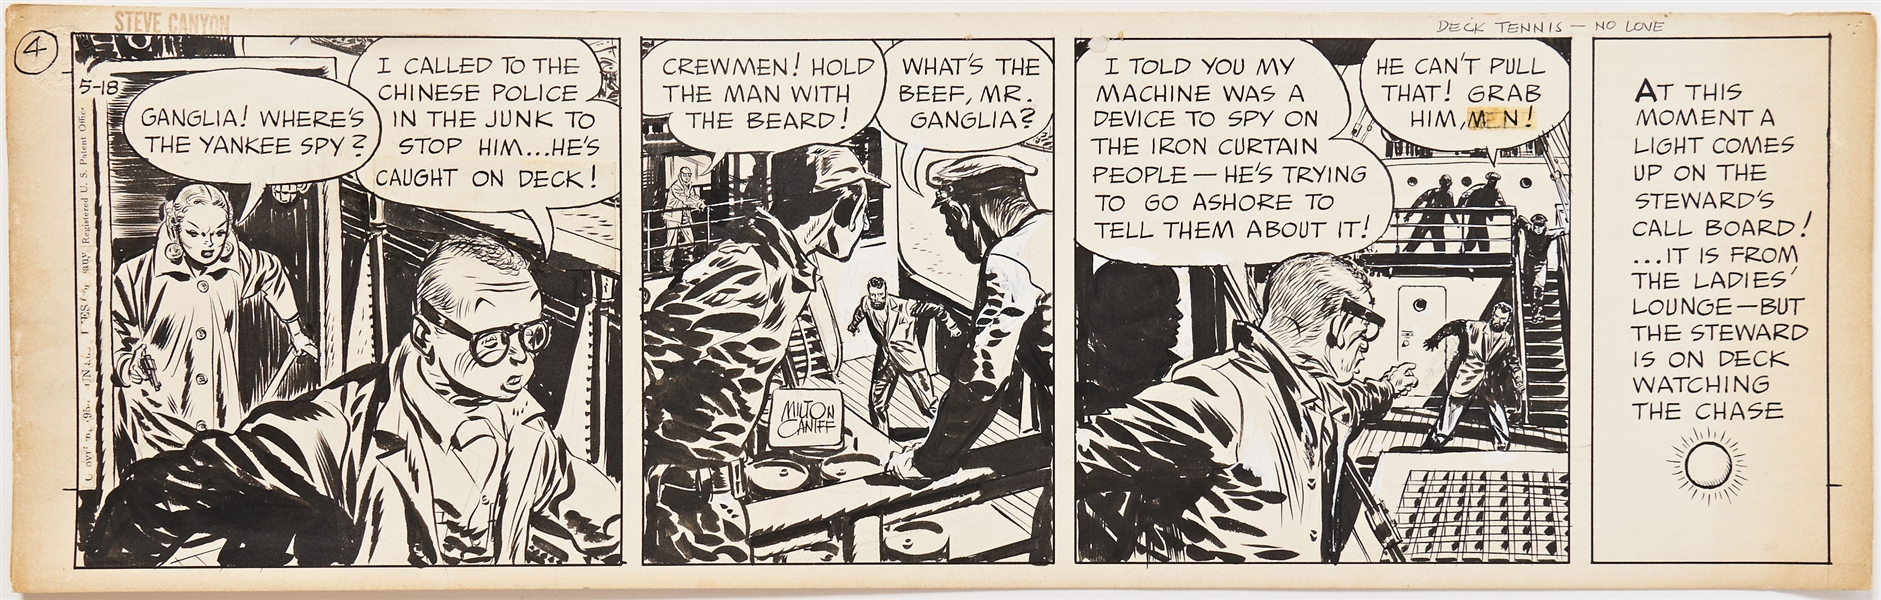 Milton Caniff ''Steve Canyon'' Comic Strip Original Art Dated 18 May (1950s) -- Measures 23'' x 7.25'' -- Very Good